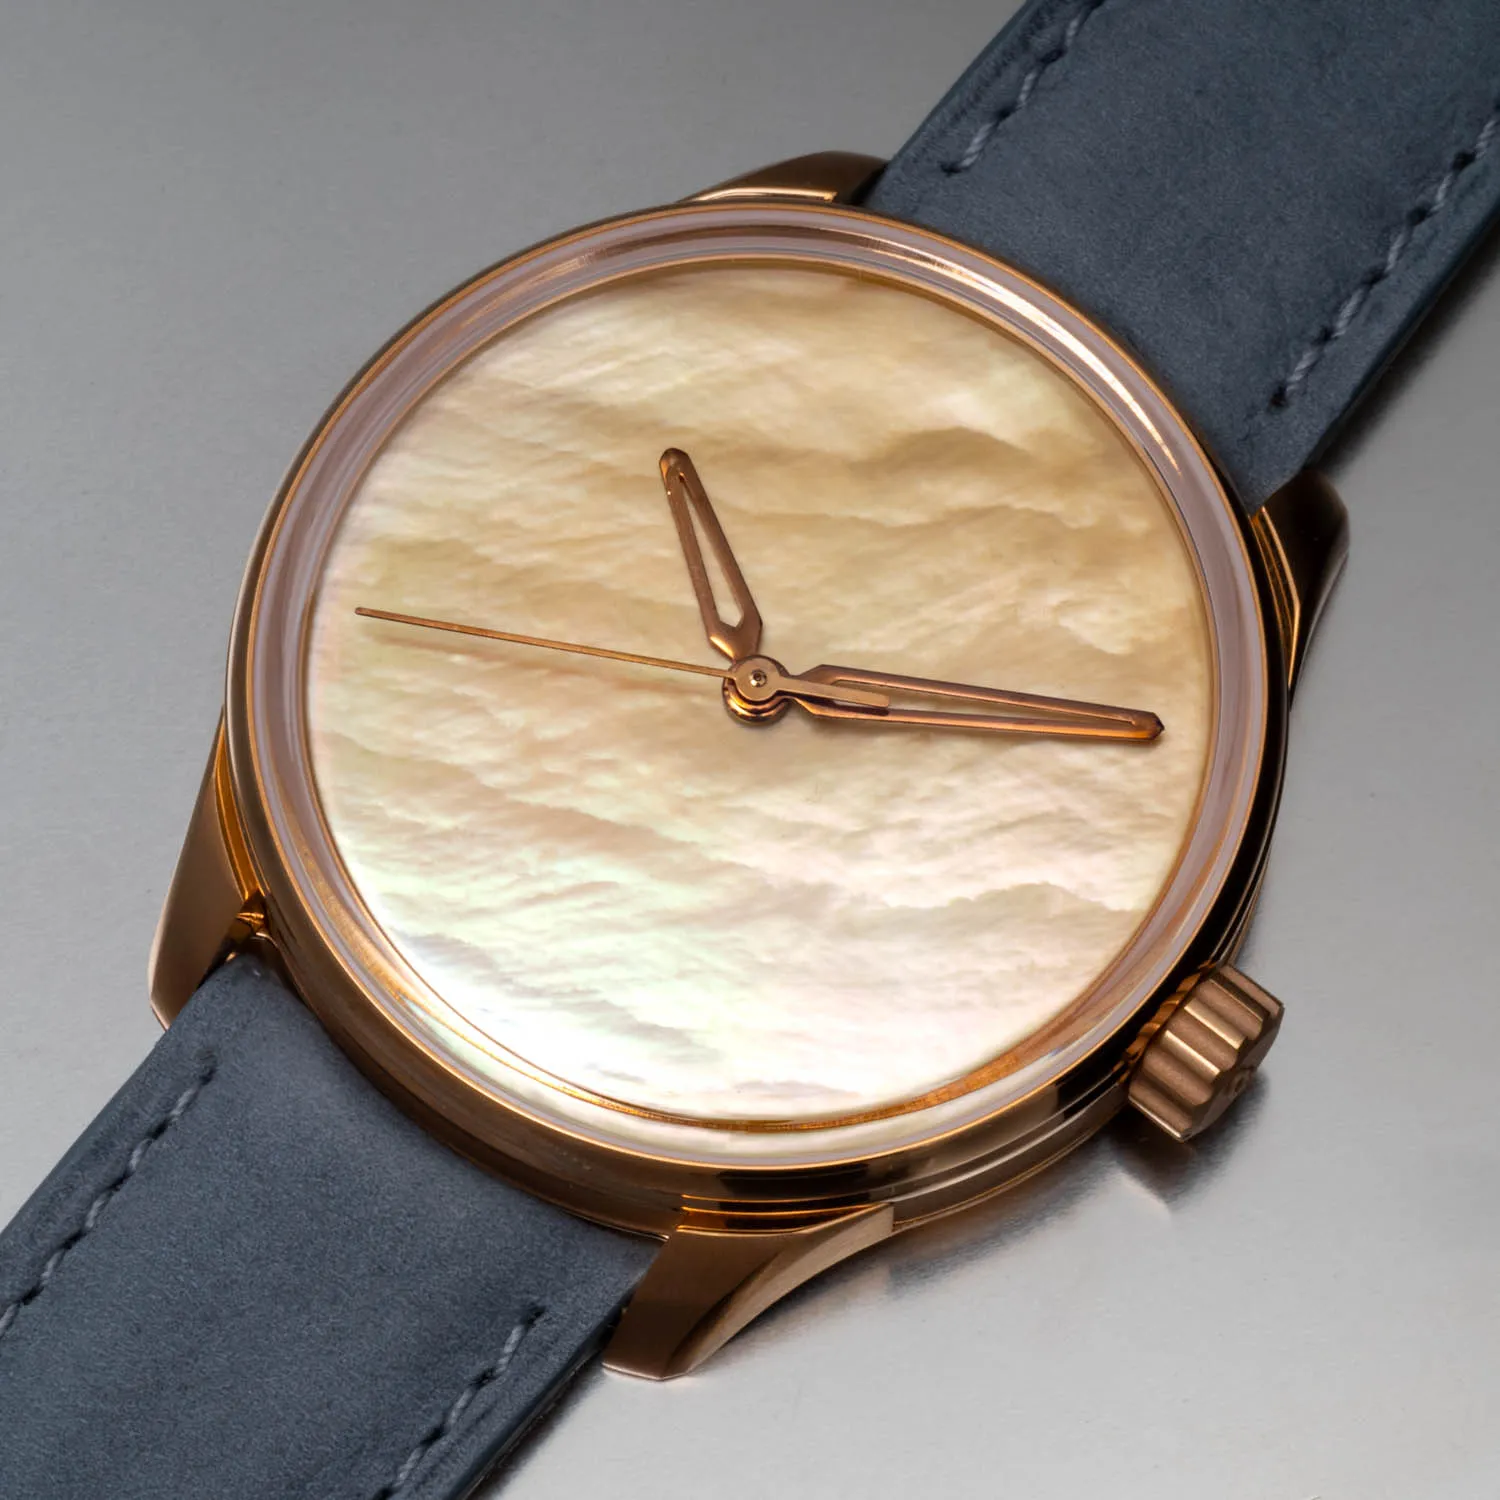 SB04 Yellow mother of pearl - Bespoke watches